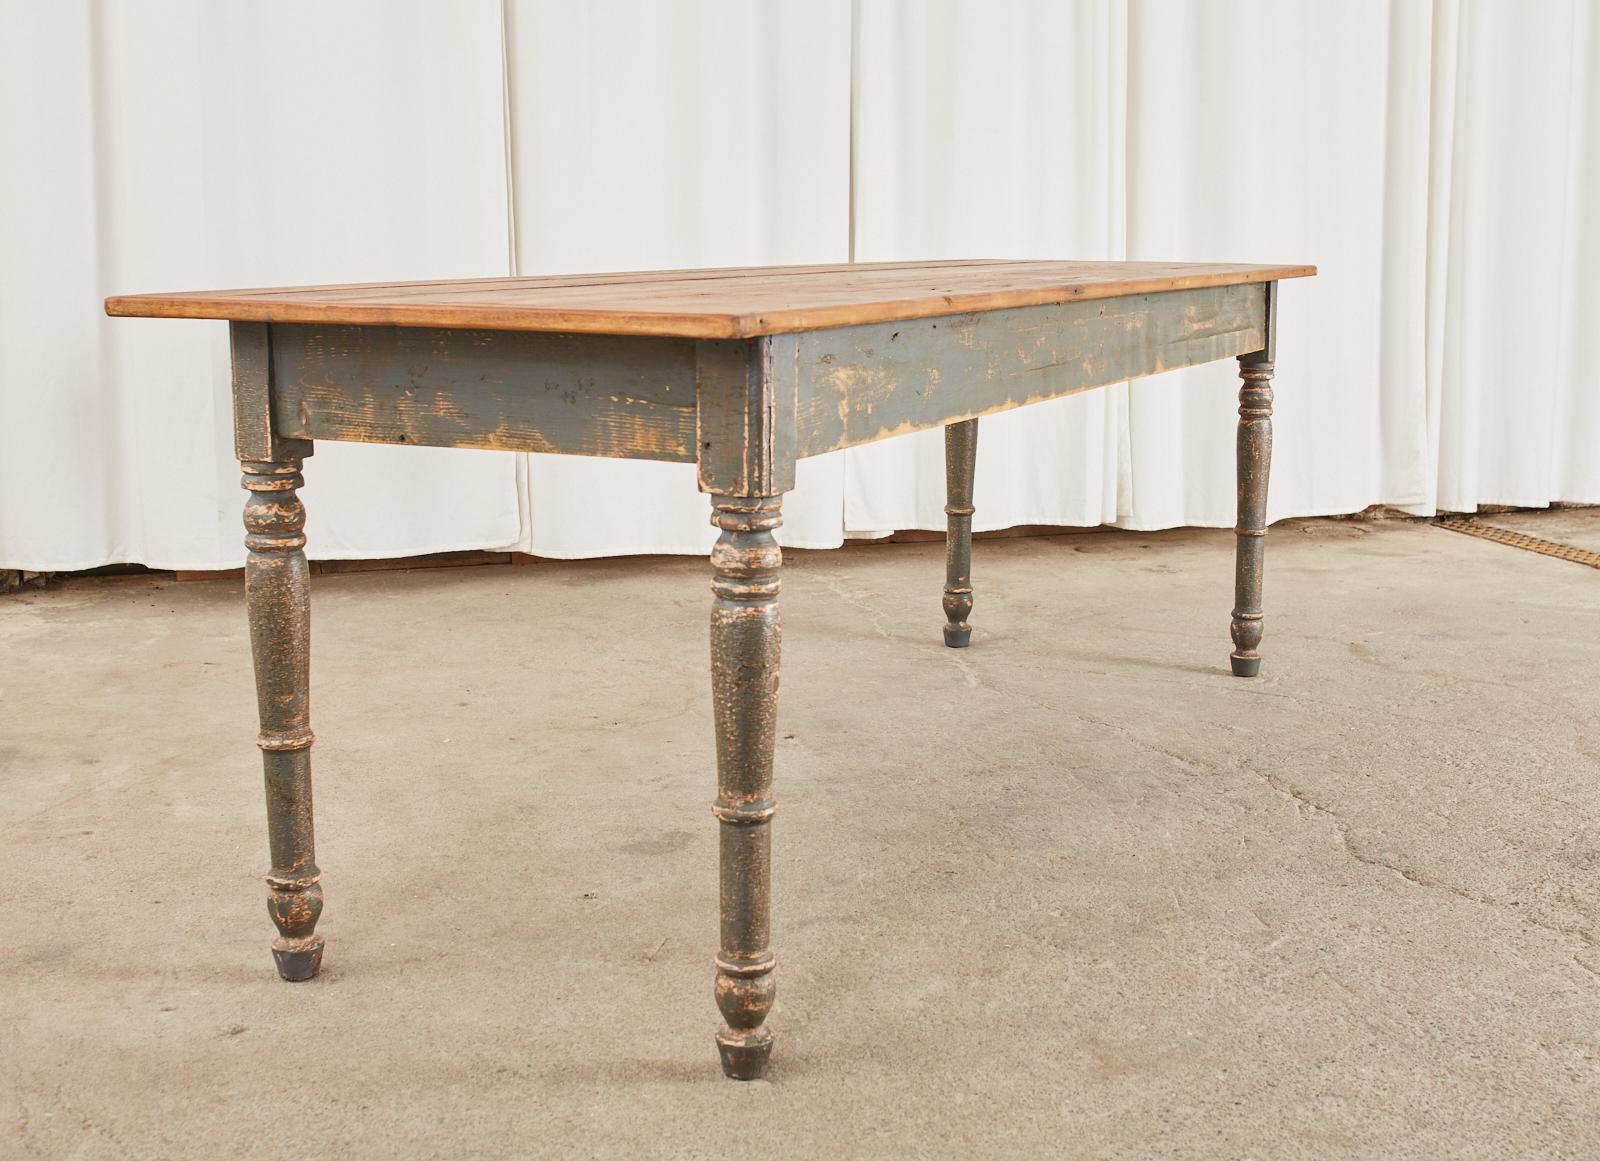 20th Century American Country Painted Pine Farmhouse Dining Table